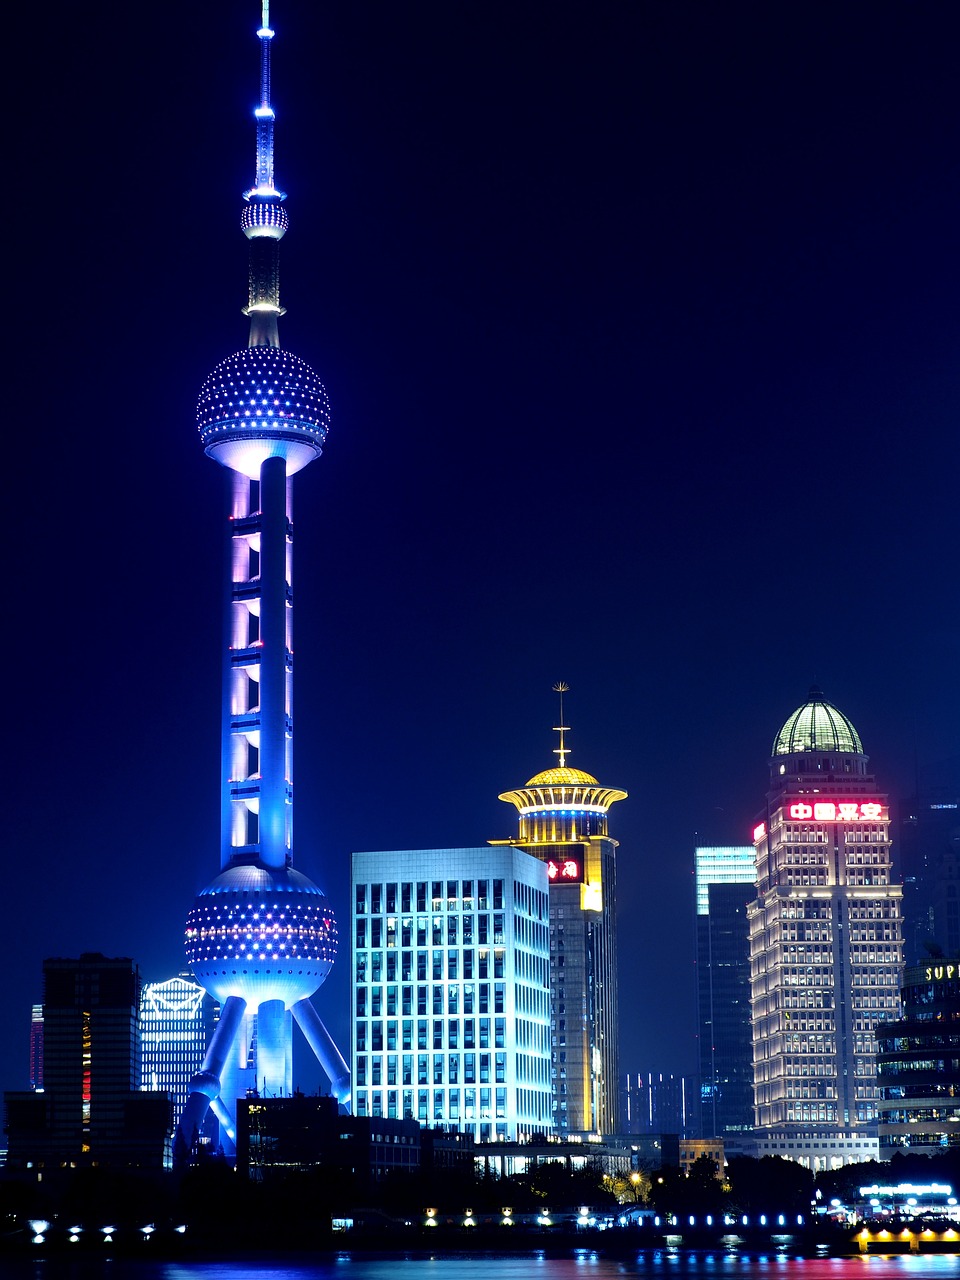 Shanghai, China is one of the cheapest city break destinations in the world